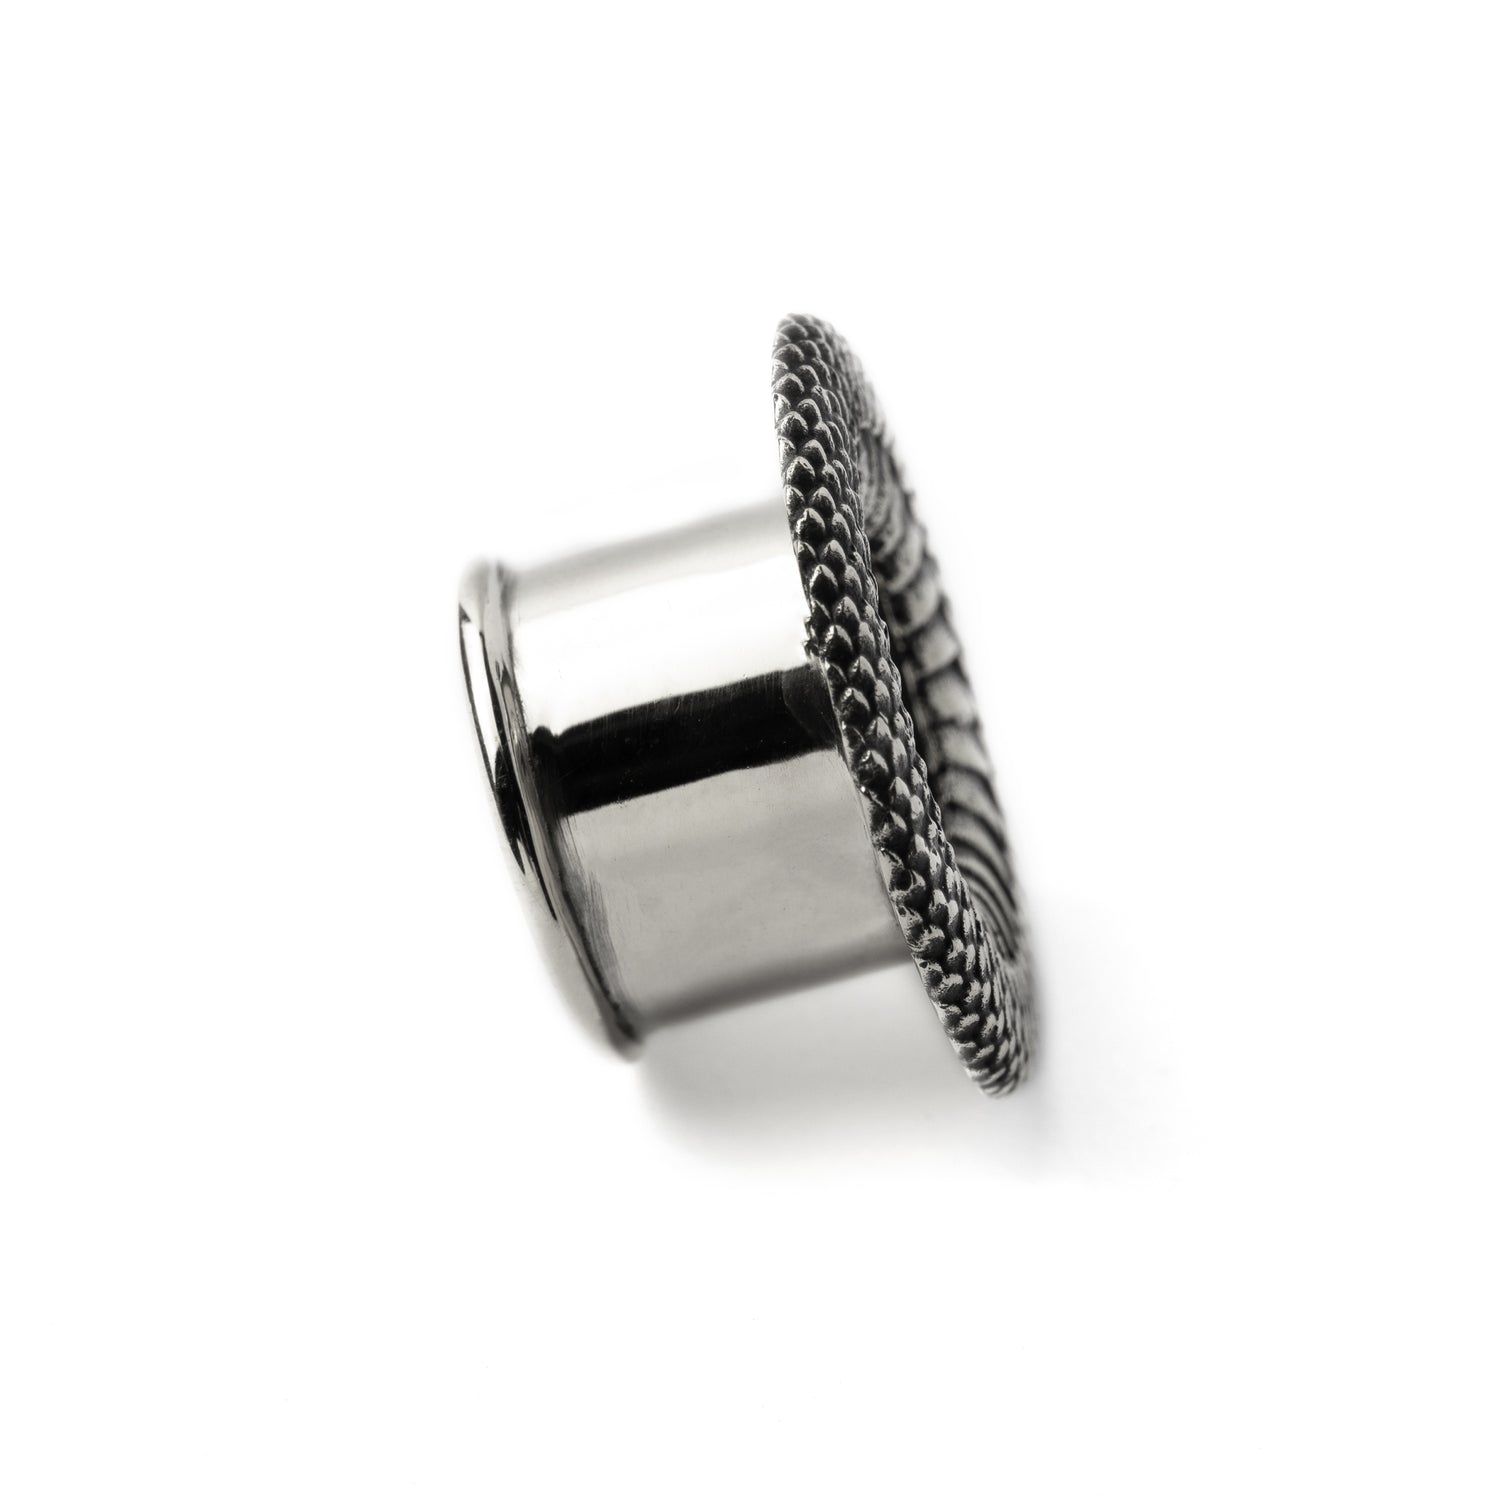 Snakes skin texture silver plug tunnels side view